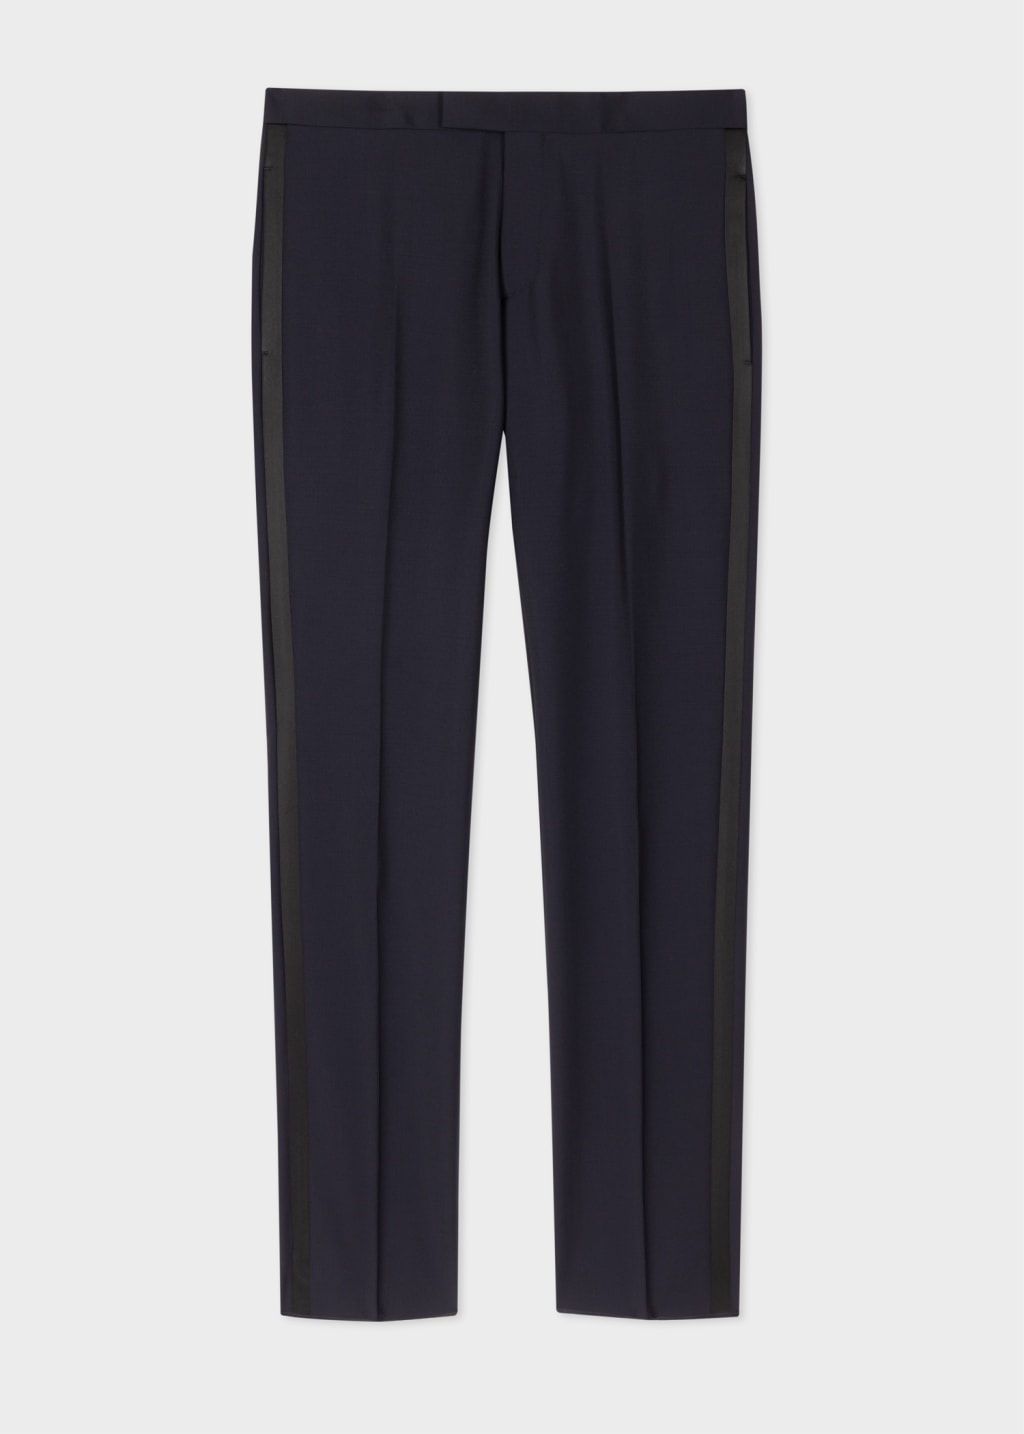 Product View - Slim-Fit Navy Wool-Mohair Evening Trousers